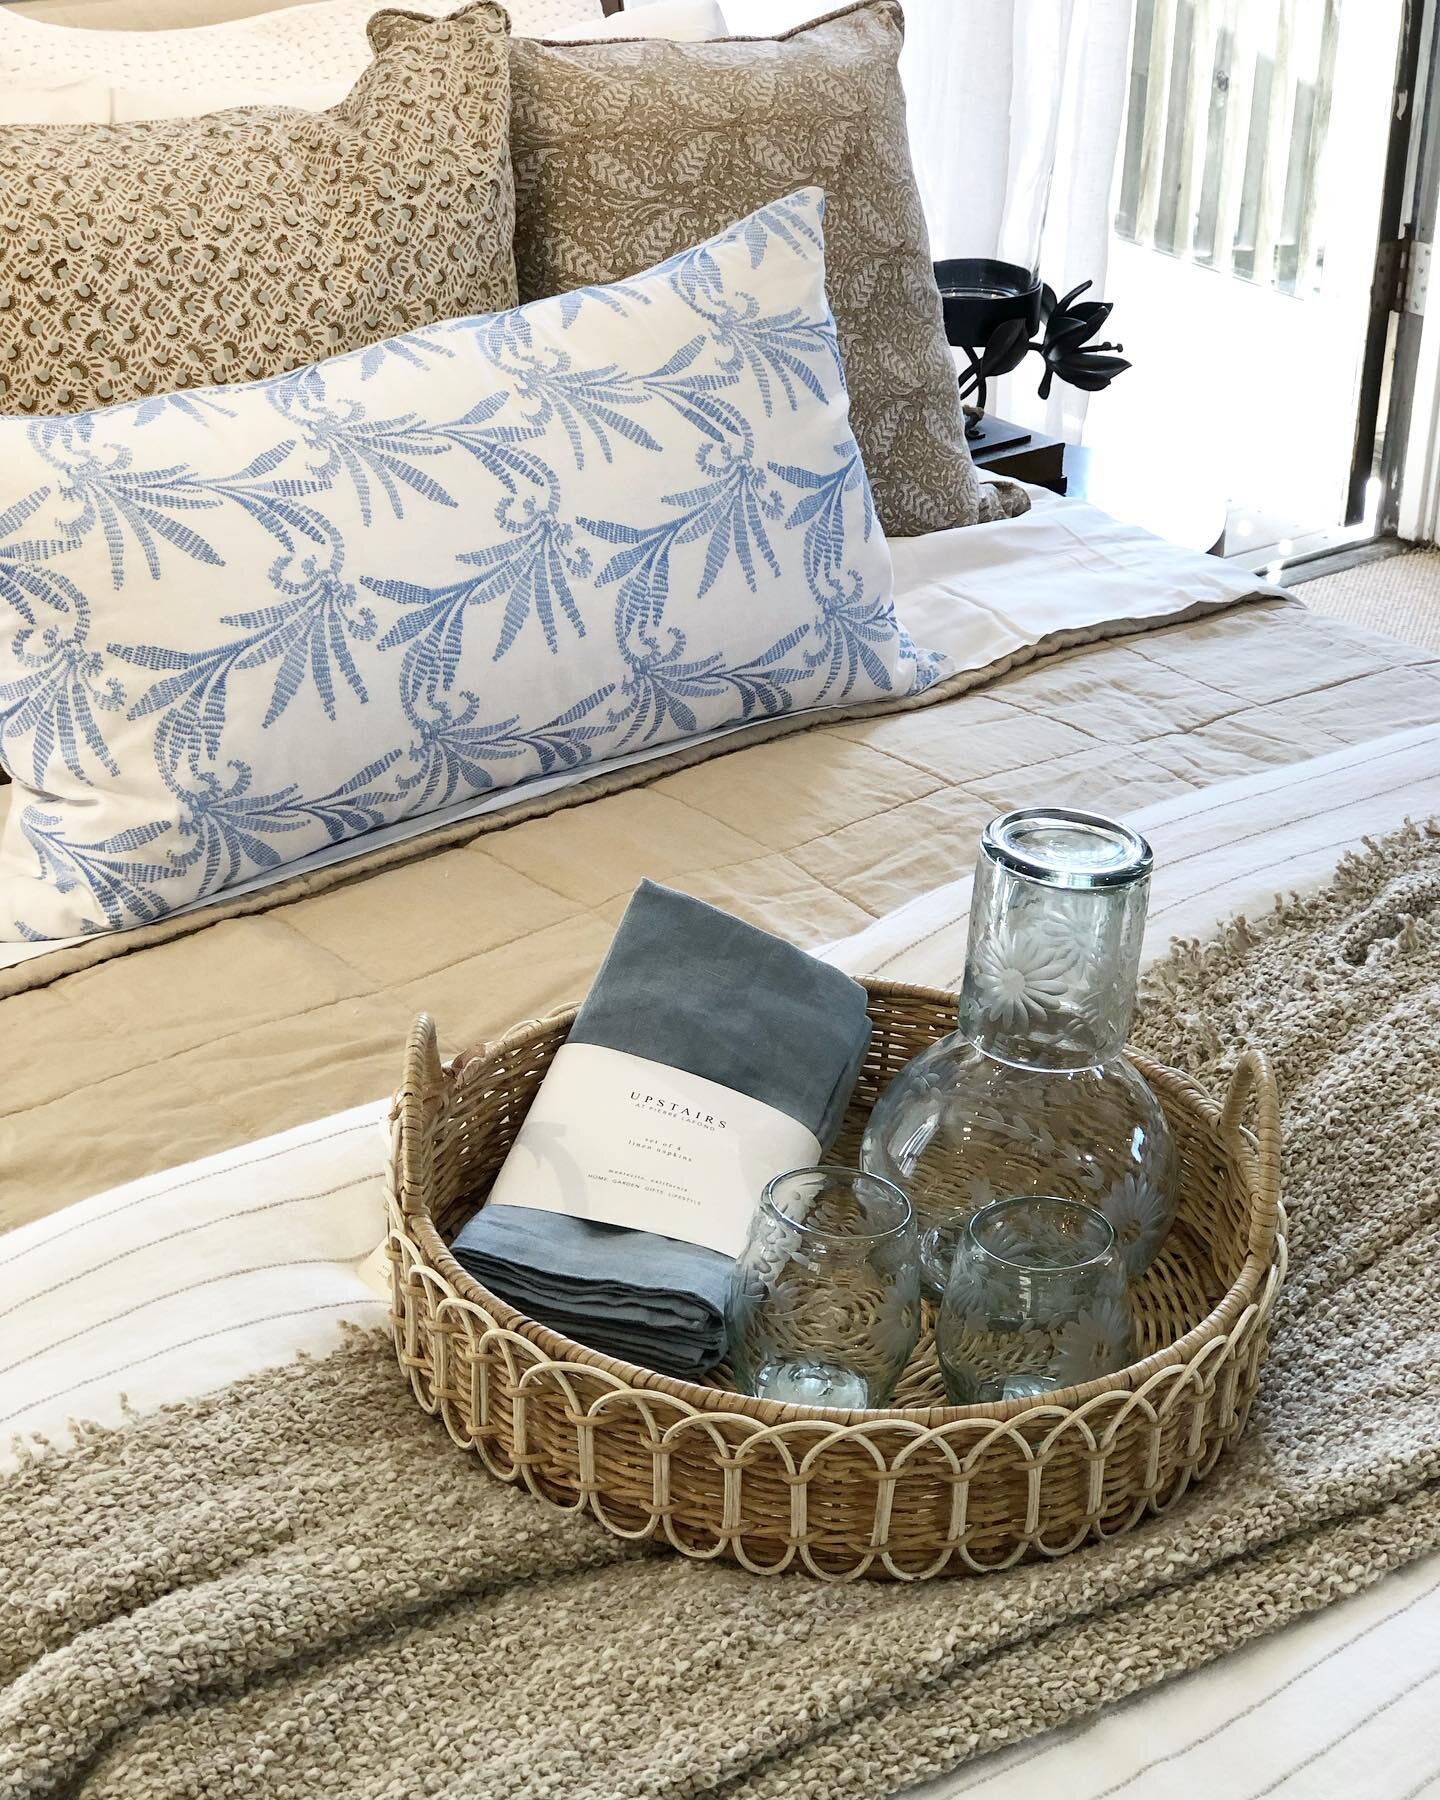 Bedroom details with some of our favorite things!

@shopwendyfoster